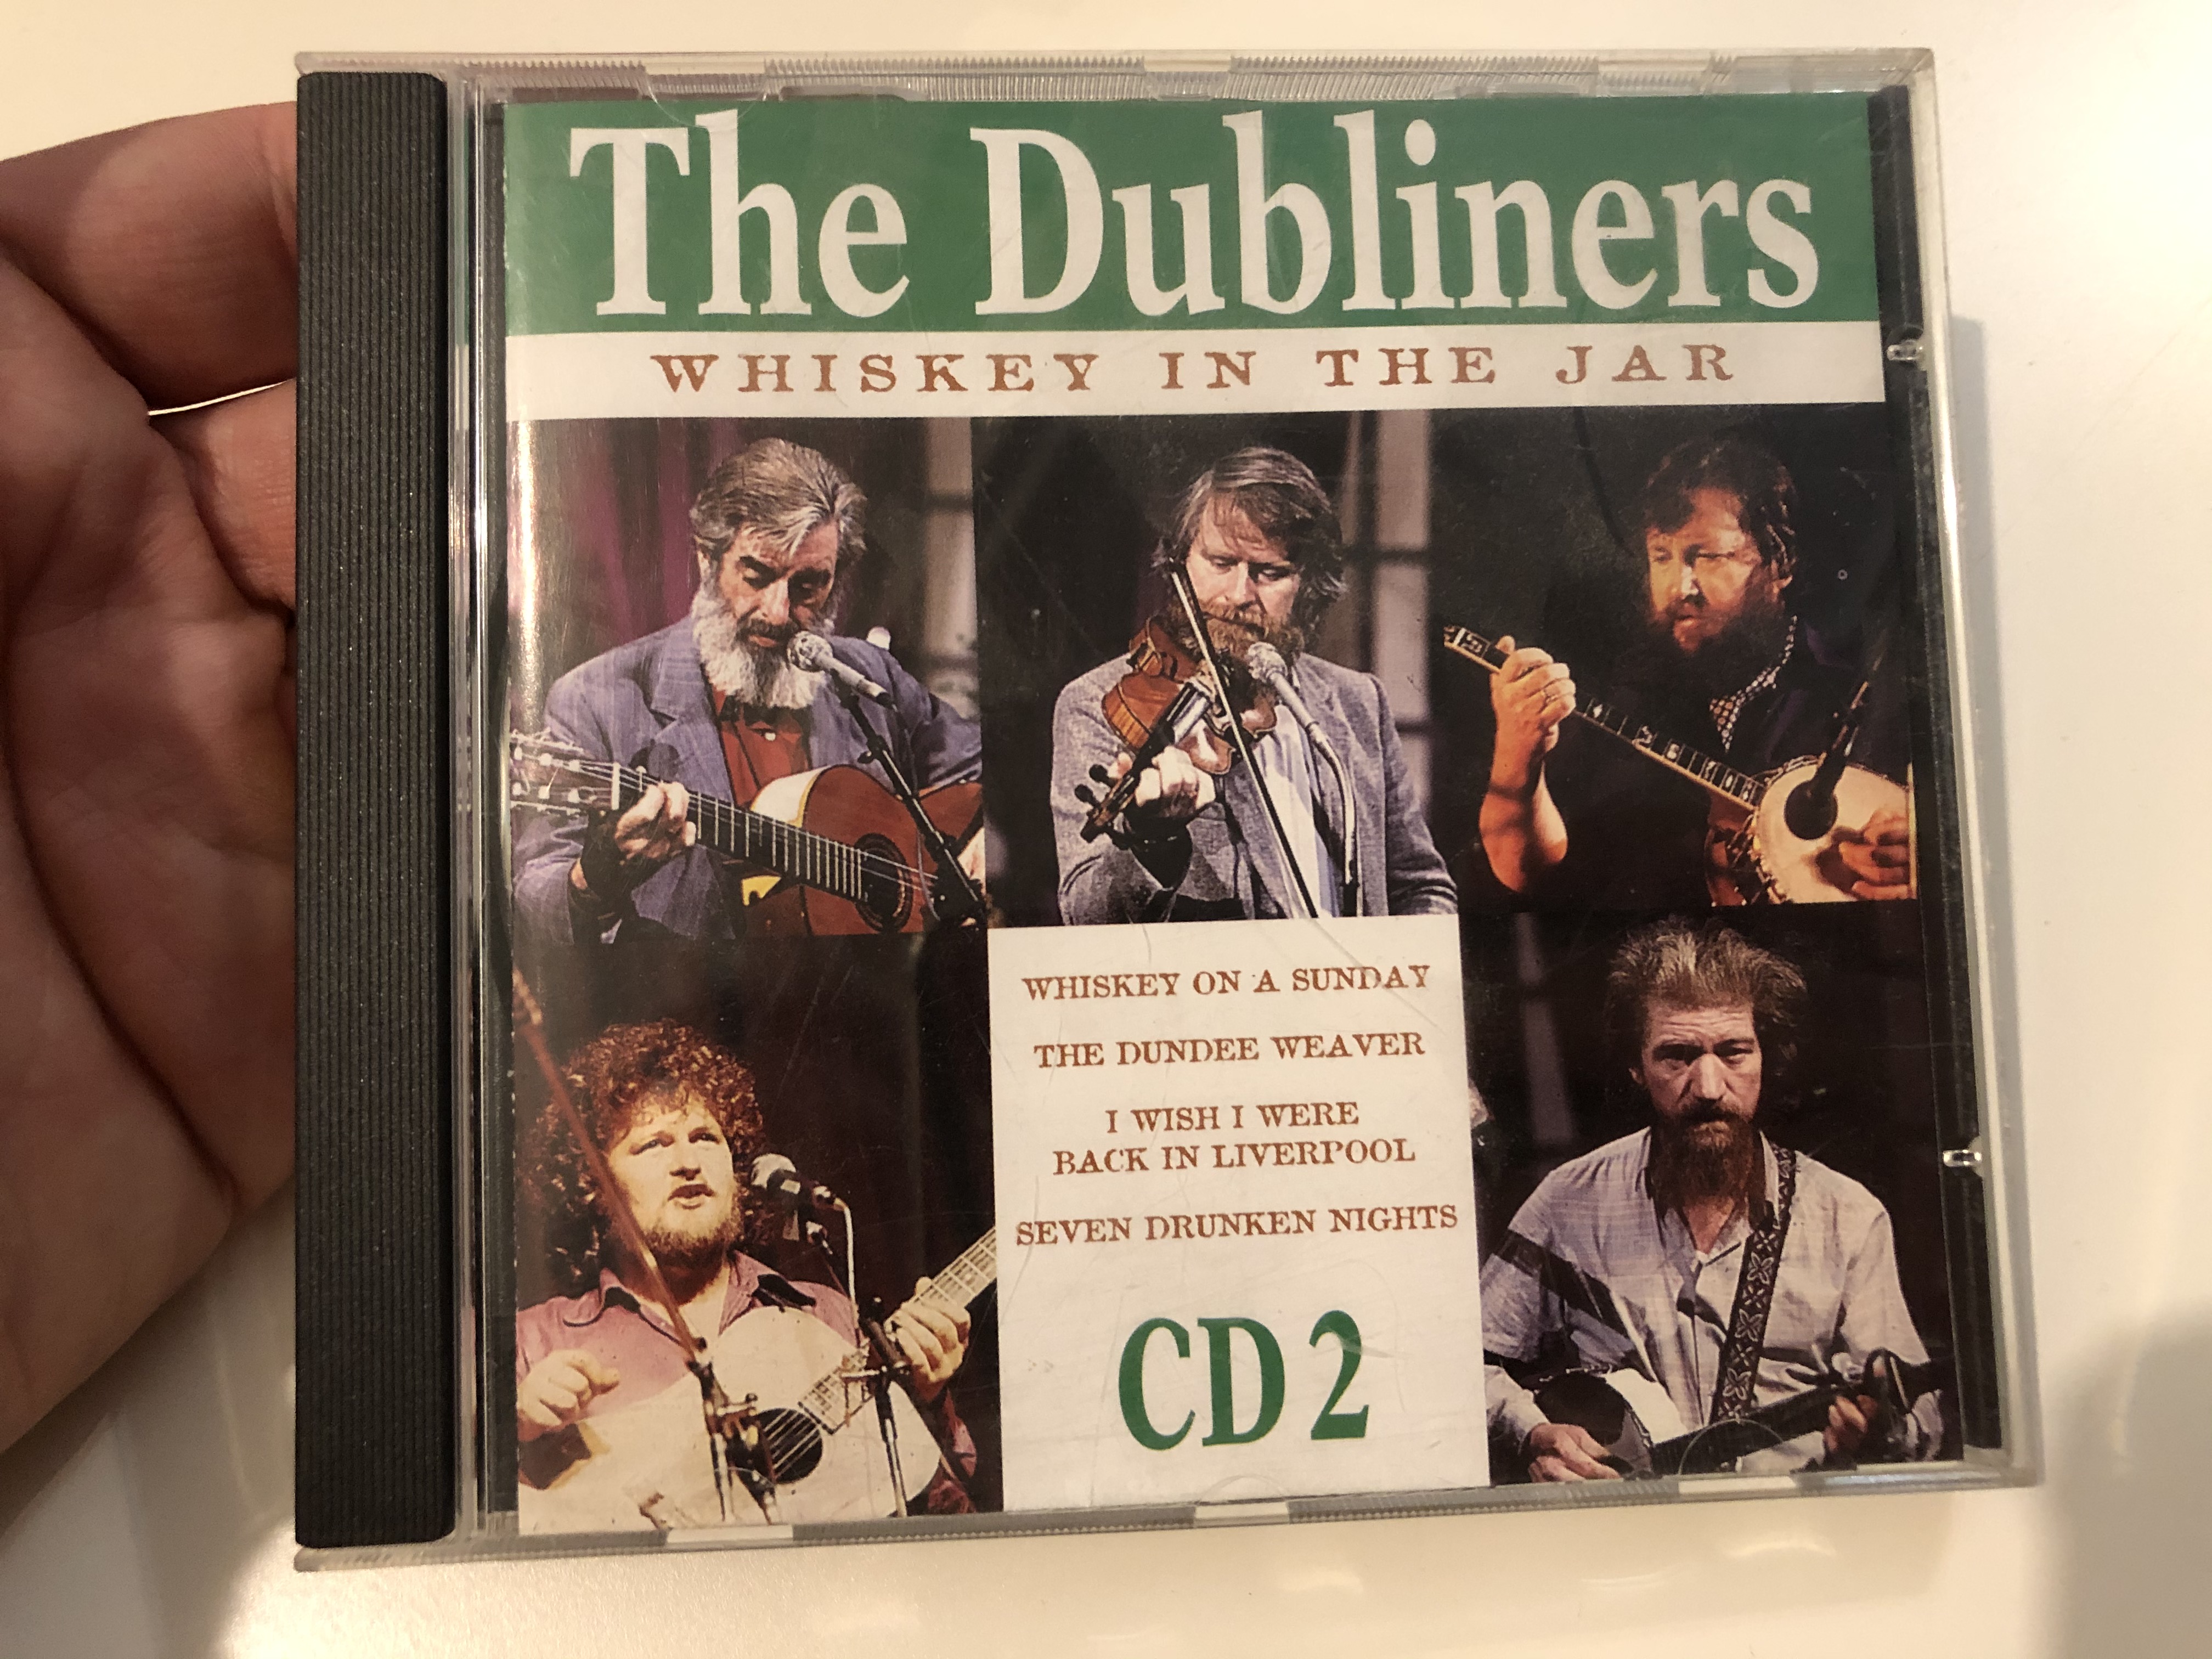 the-dubliners-whiskey-in-the-jar-whiskey-on-a-sunday-the-dundee-weaver-i-wish-i-were-back-in-liverpool-seven-drunken-nights-disky-audio-cd-1998-bx-853682-1-.jpg